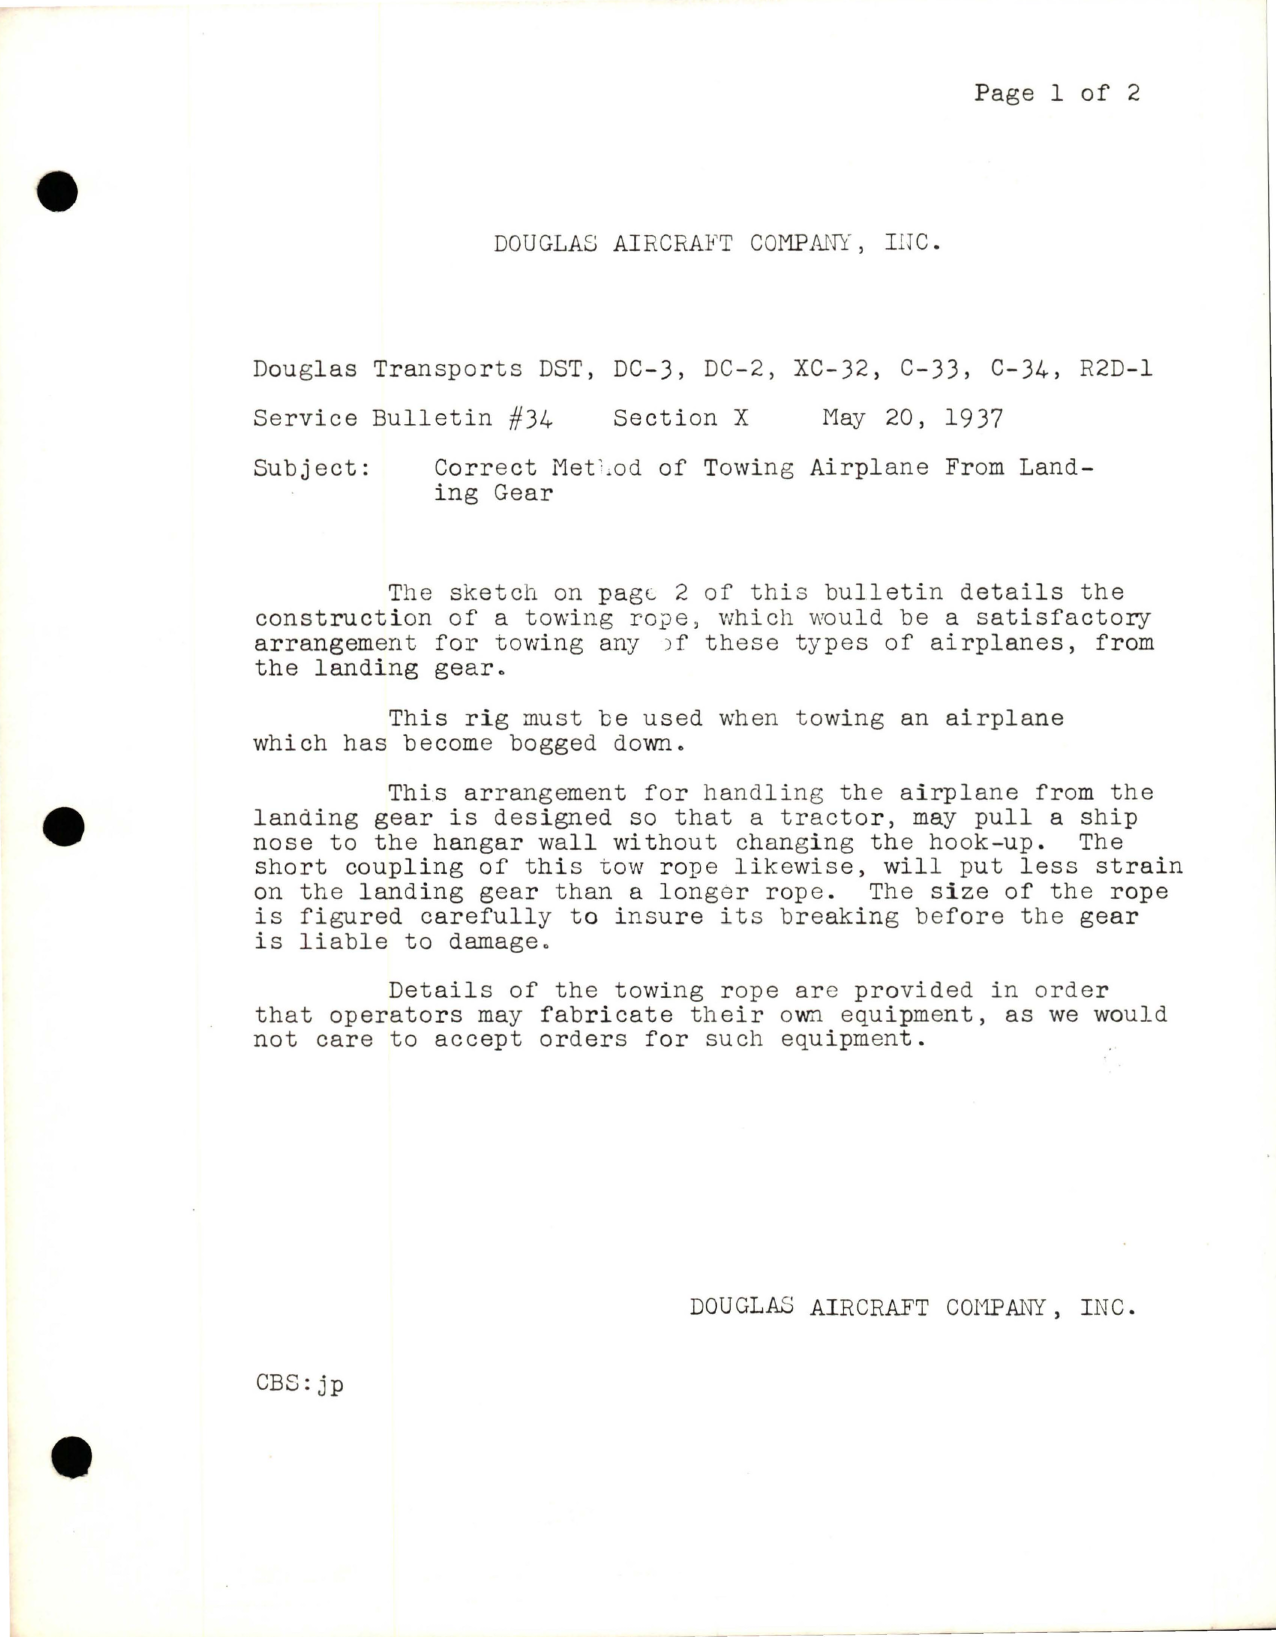 Sample page 1 from AirCorps Library document: Correct Method of Towing Airplane from Landing Gear